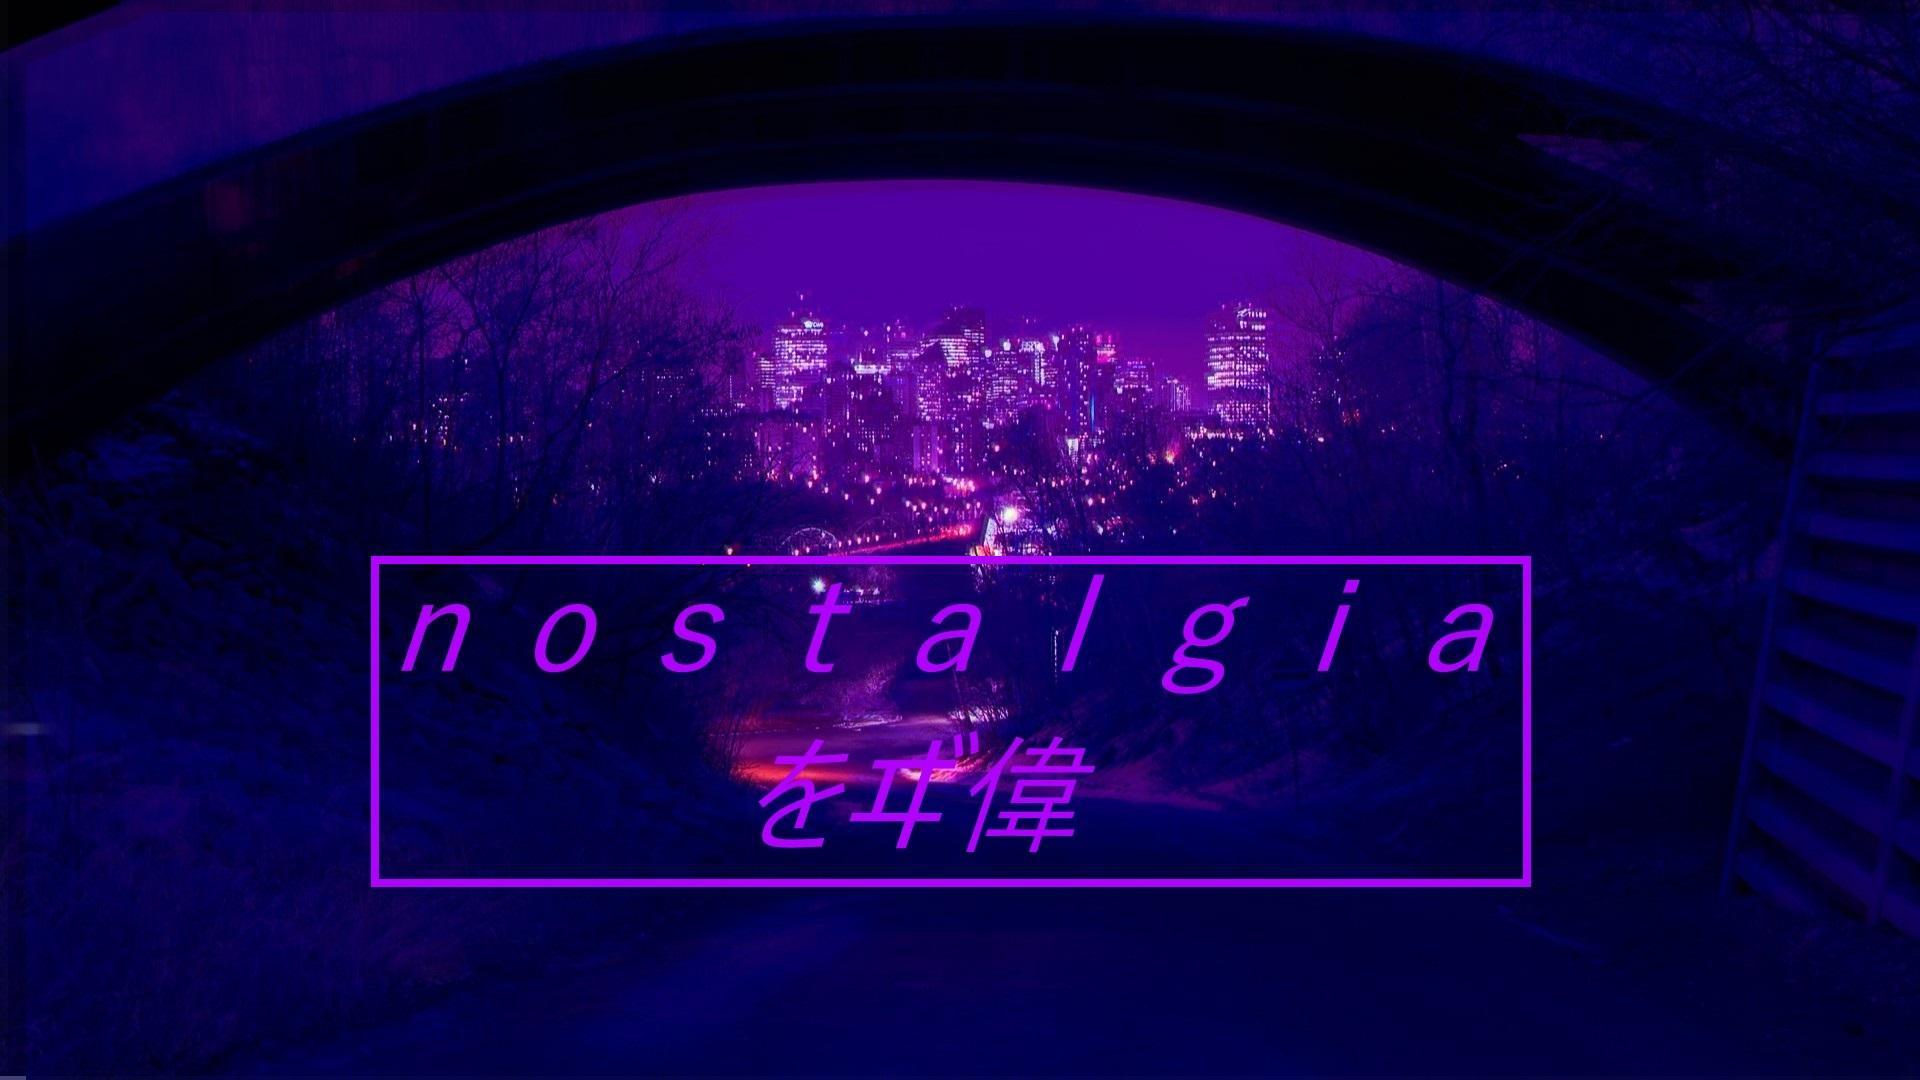 Aesthetic Vaporwave Wallpaper For Desktop With Purple And Blue Color Scheme And The Word Nostalgia In The Middle - Lo fi